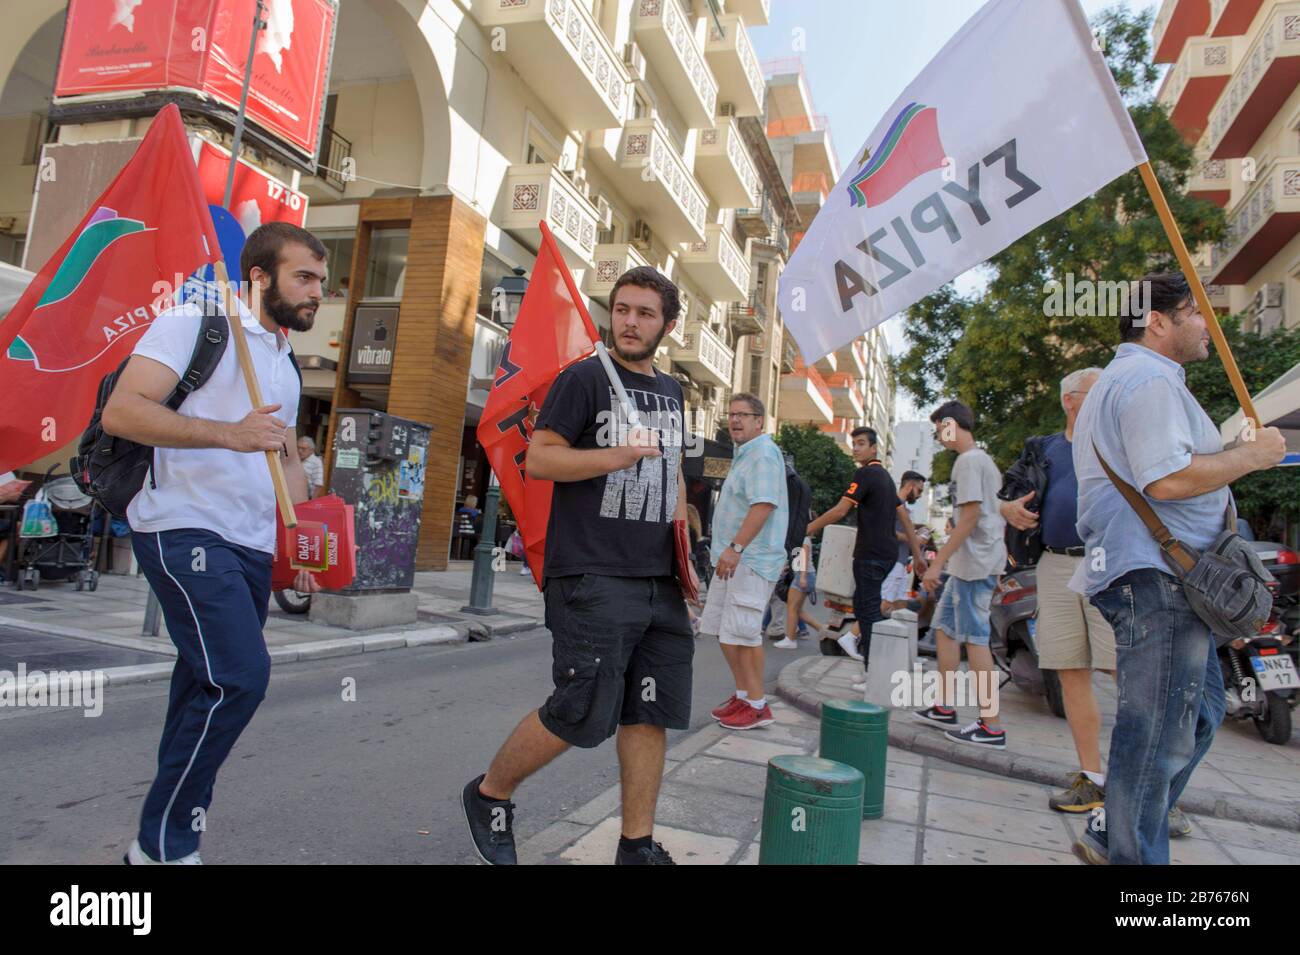 18.09.2015, Thessaloniki / Greece. Election campaign for the parliamentary elections in Greece in September 2015, Syriza party members and parliamentary candidates in the street election campaign. Flags. [automated translation] Stock Photo